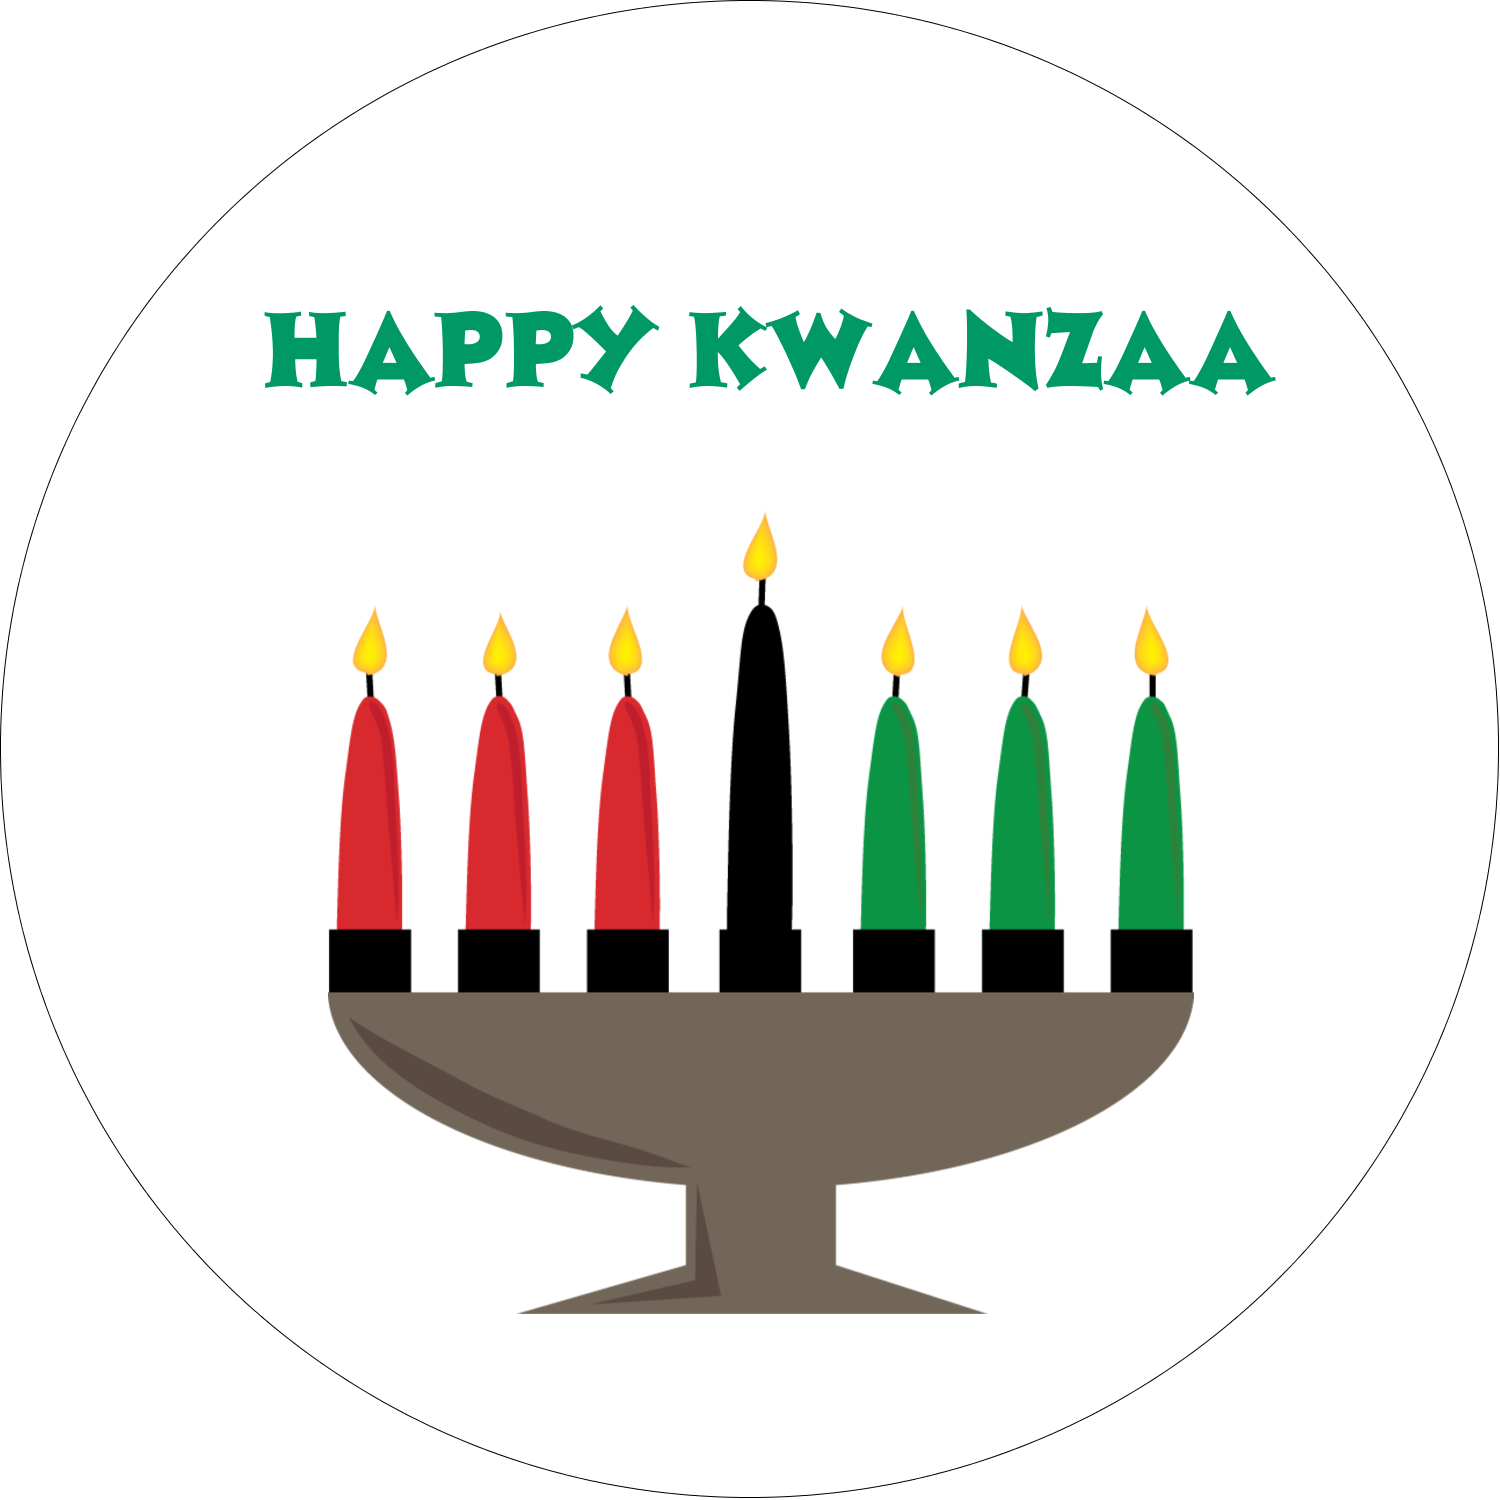 printable-kwanzaa-decorations-printable-word-searches